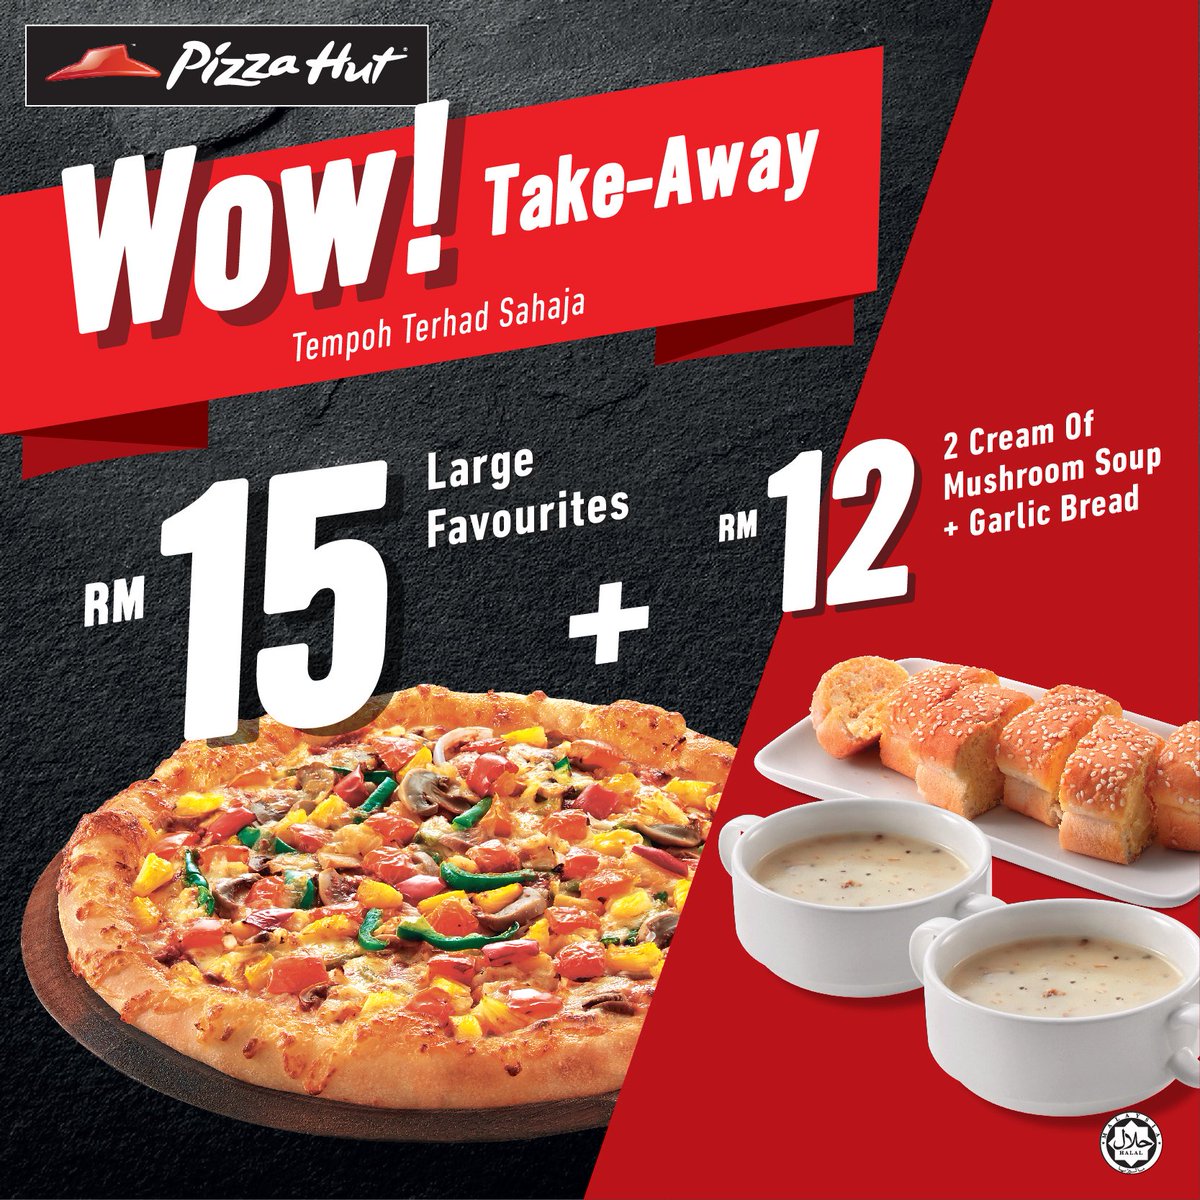 Pizza Hut Malaysia On Twitter Complete Your Wow Take Away Pizza With Sides Setjimat 1 Large Pizza 1 Garlic Bread 2 Soups For 4 Persons Https T Co Hk9t2tykza Https T Co S2ynfmteae